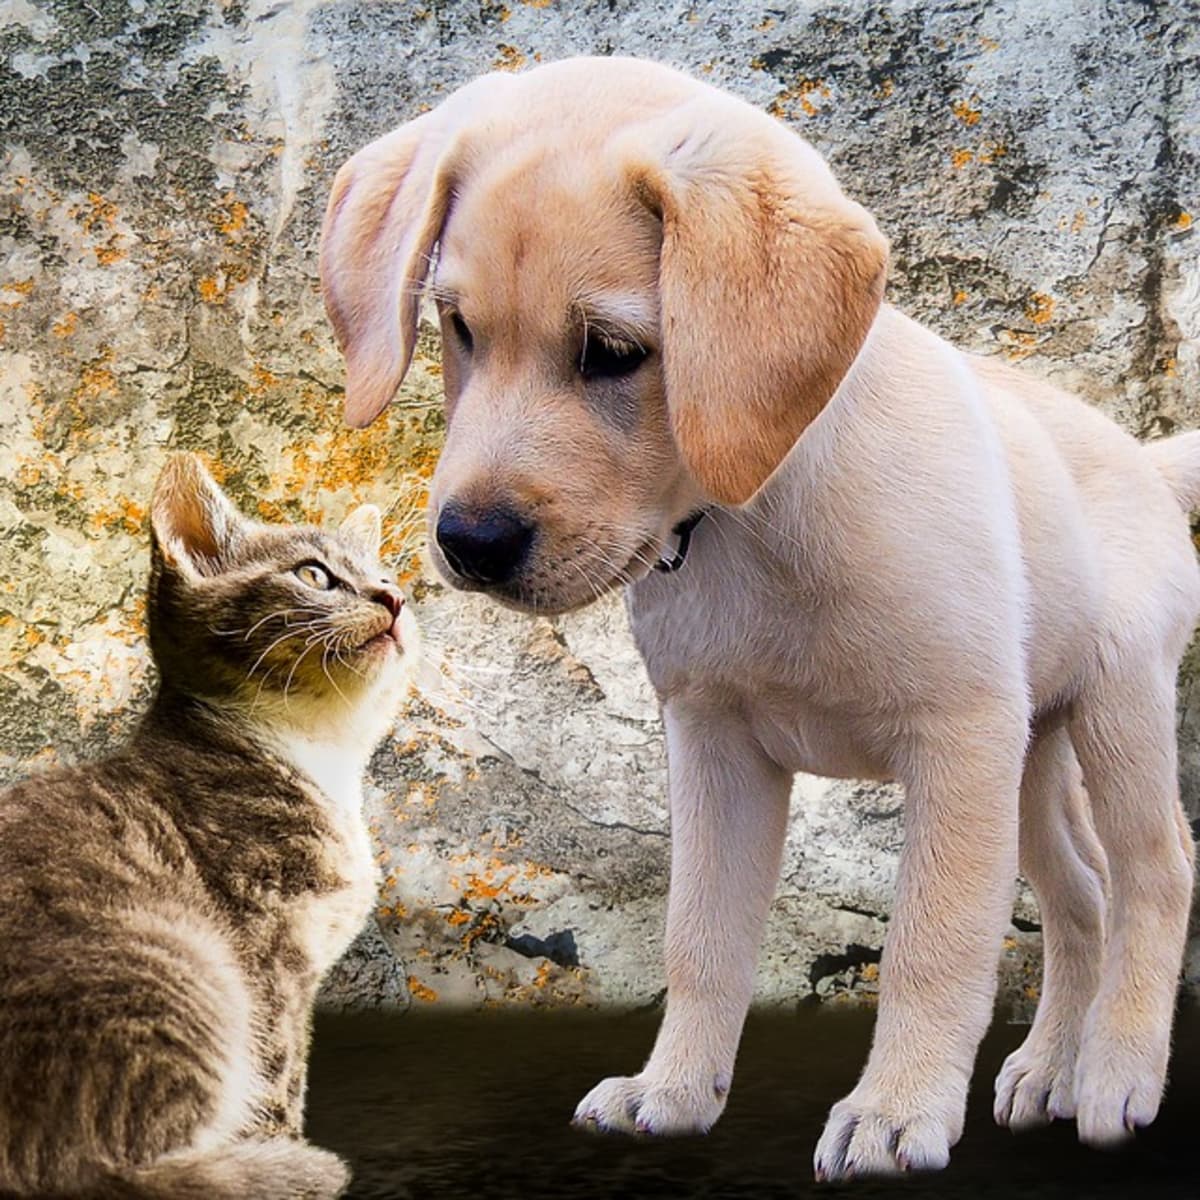 dog and cat pictures together